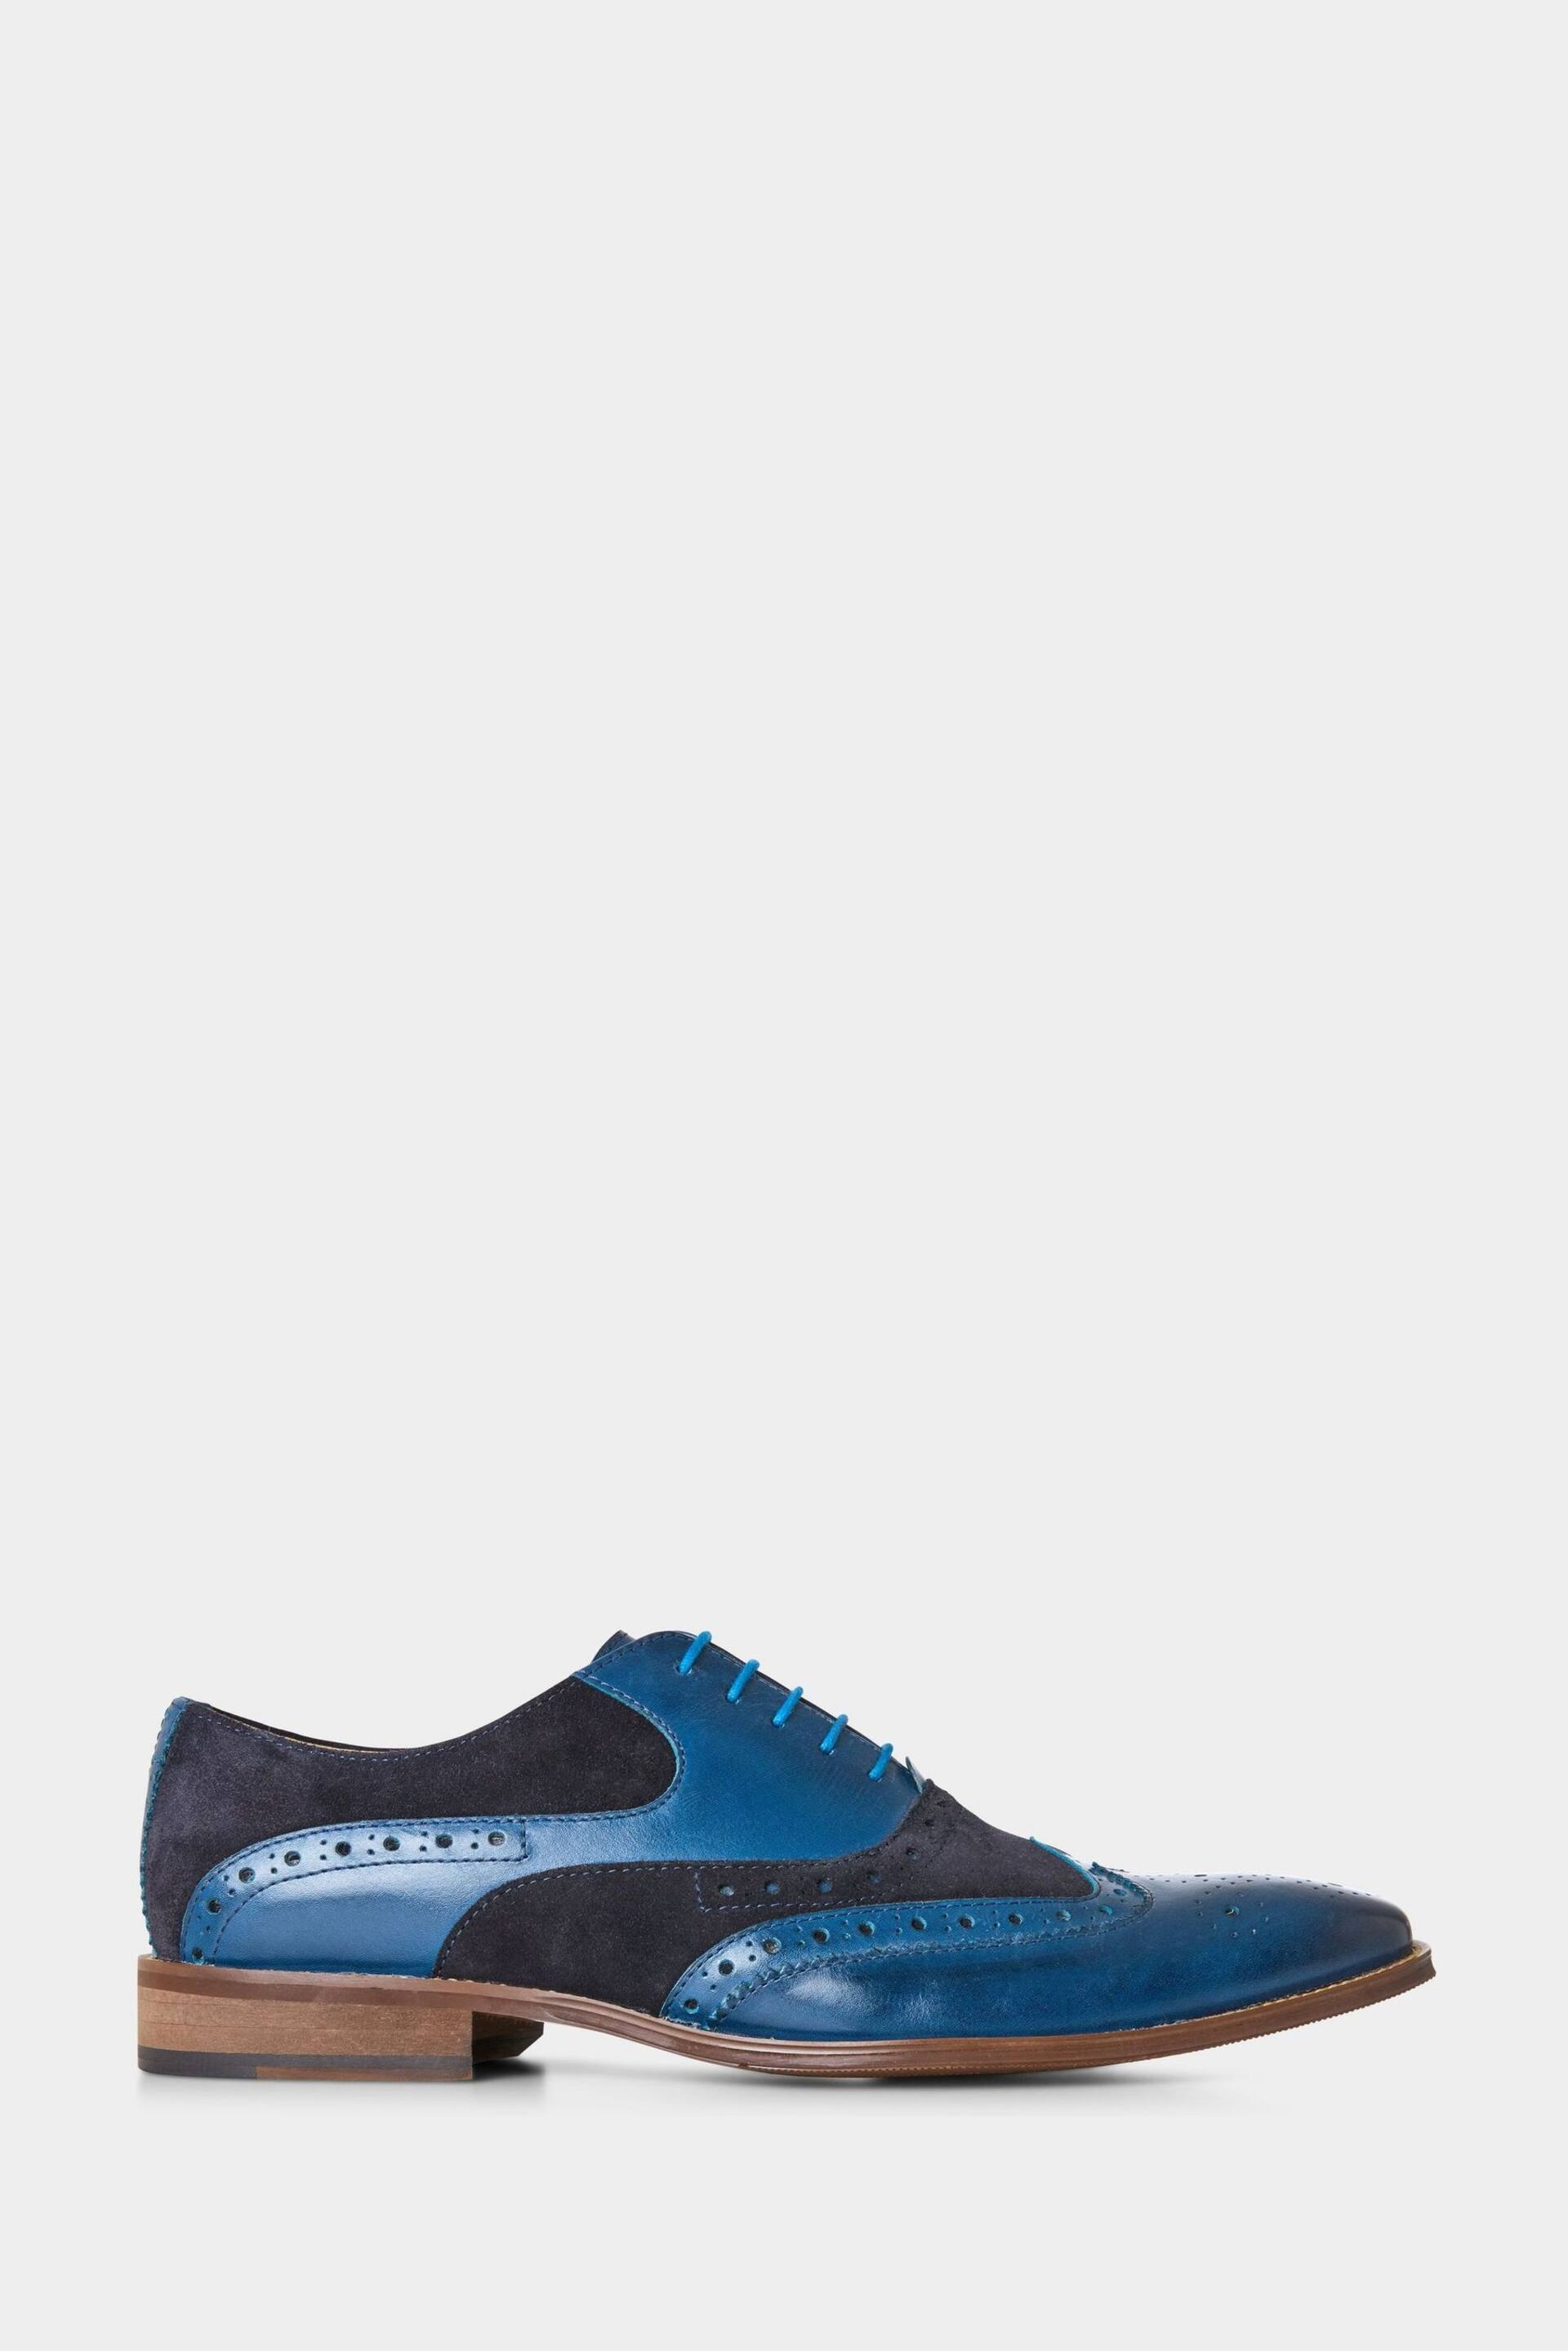 Joe Browns Blue Statement Leather Suede Brogues - Image 2 of 5